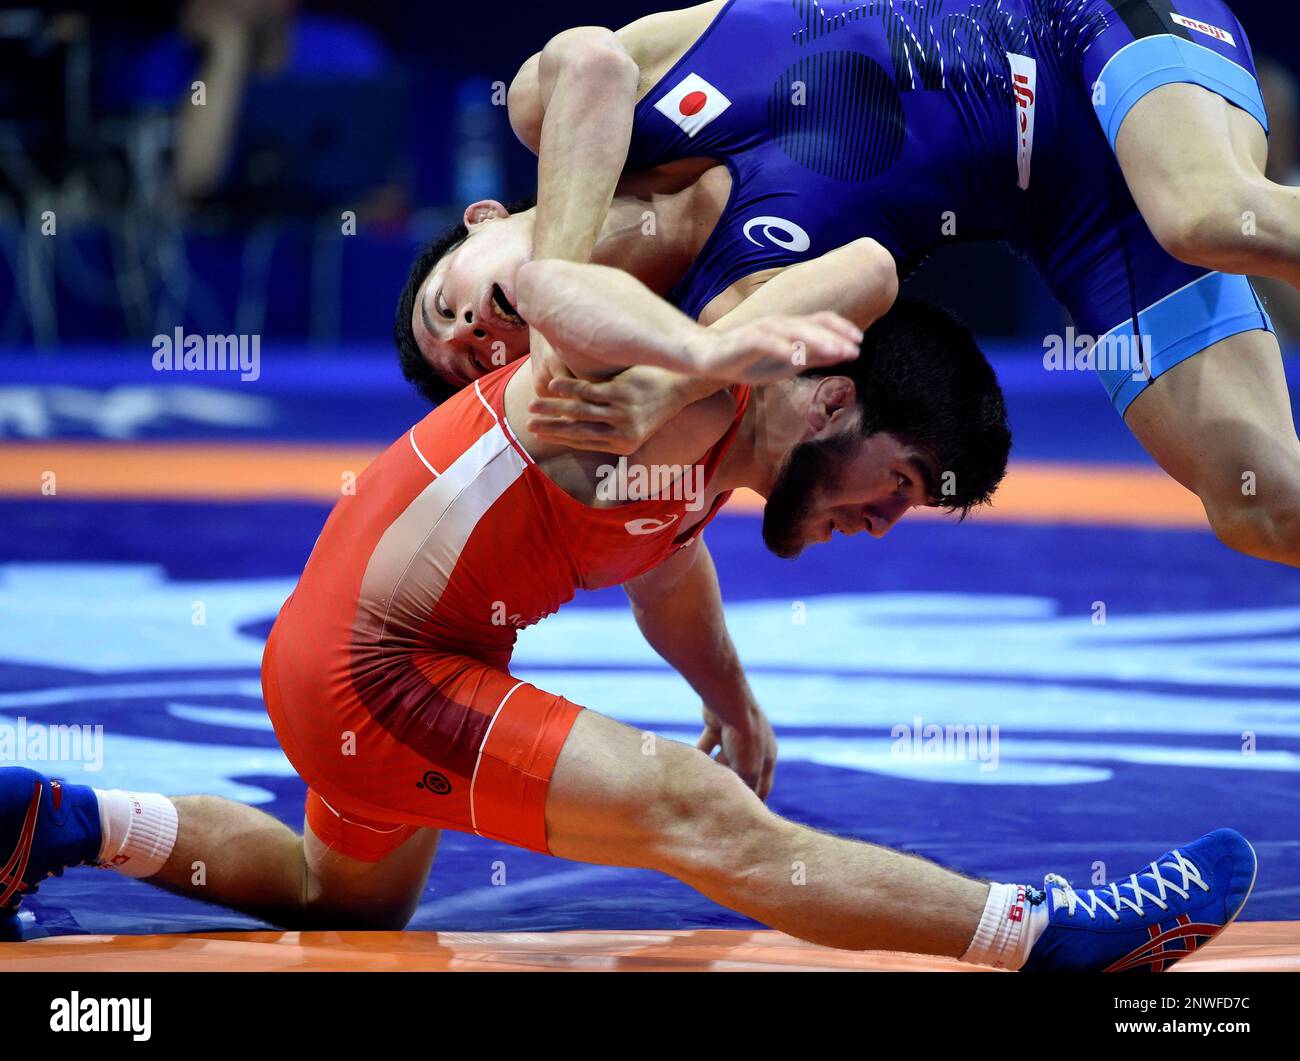 Yuki Takahashi, blue, of Japan and Zavur Uguev of Russia fight in the semifinal of mens freestyle 57 kg category of Wrestling World Championships in Papp Laszlo Budapest Sports Arena in Budapest,